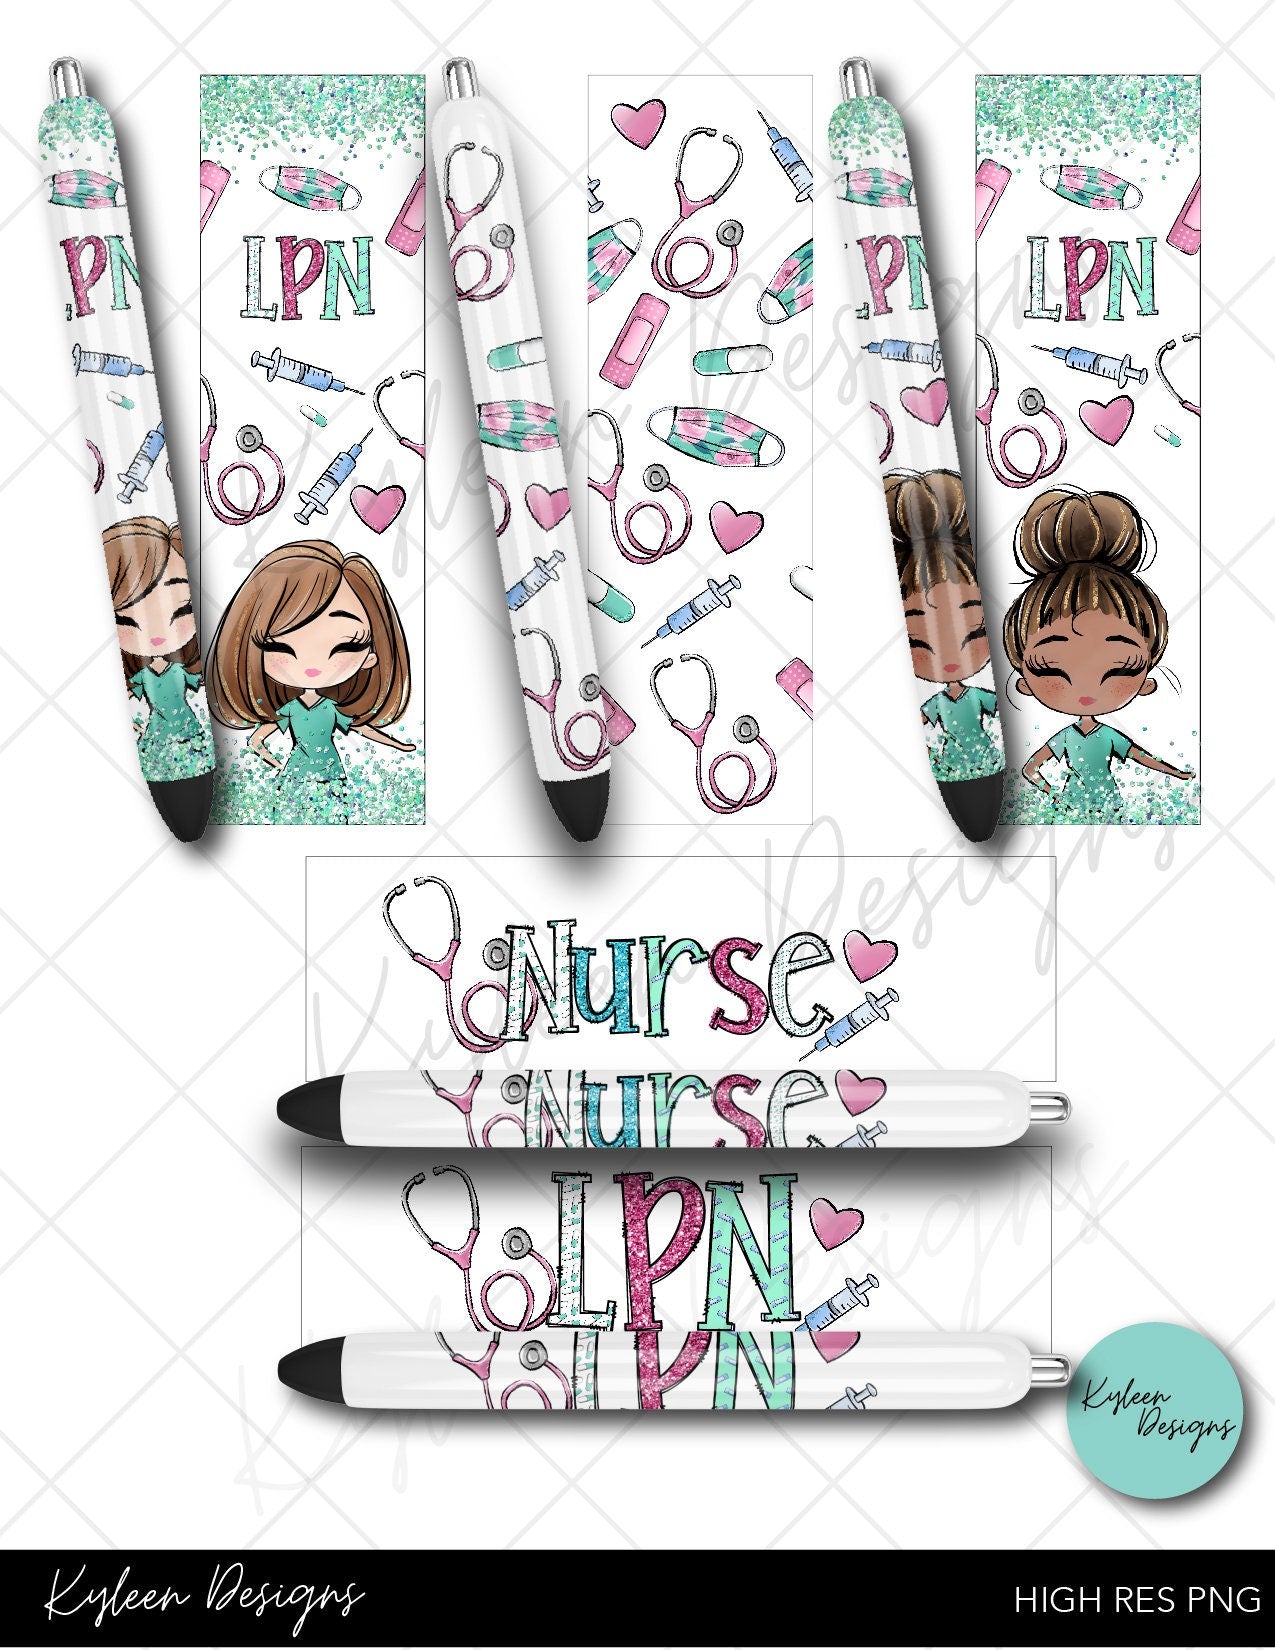 SEAMLESS LPN Nurse pen wraps for waterslide high res PNG